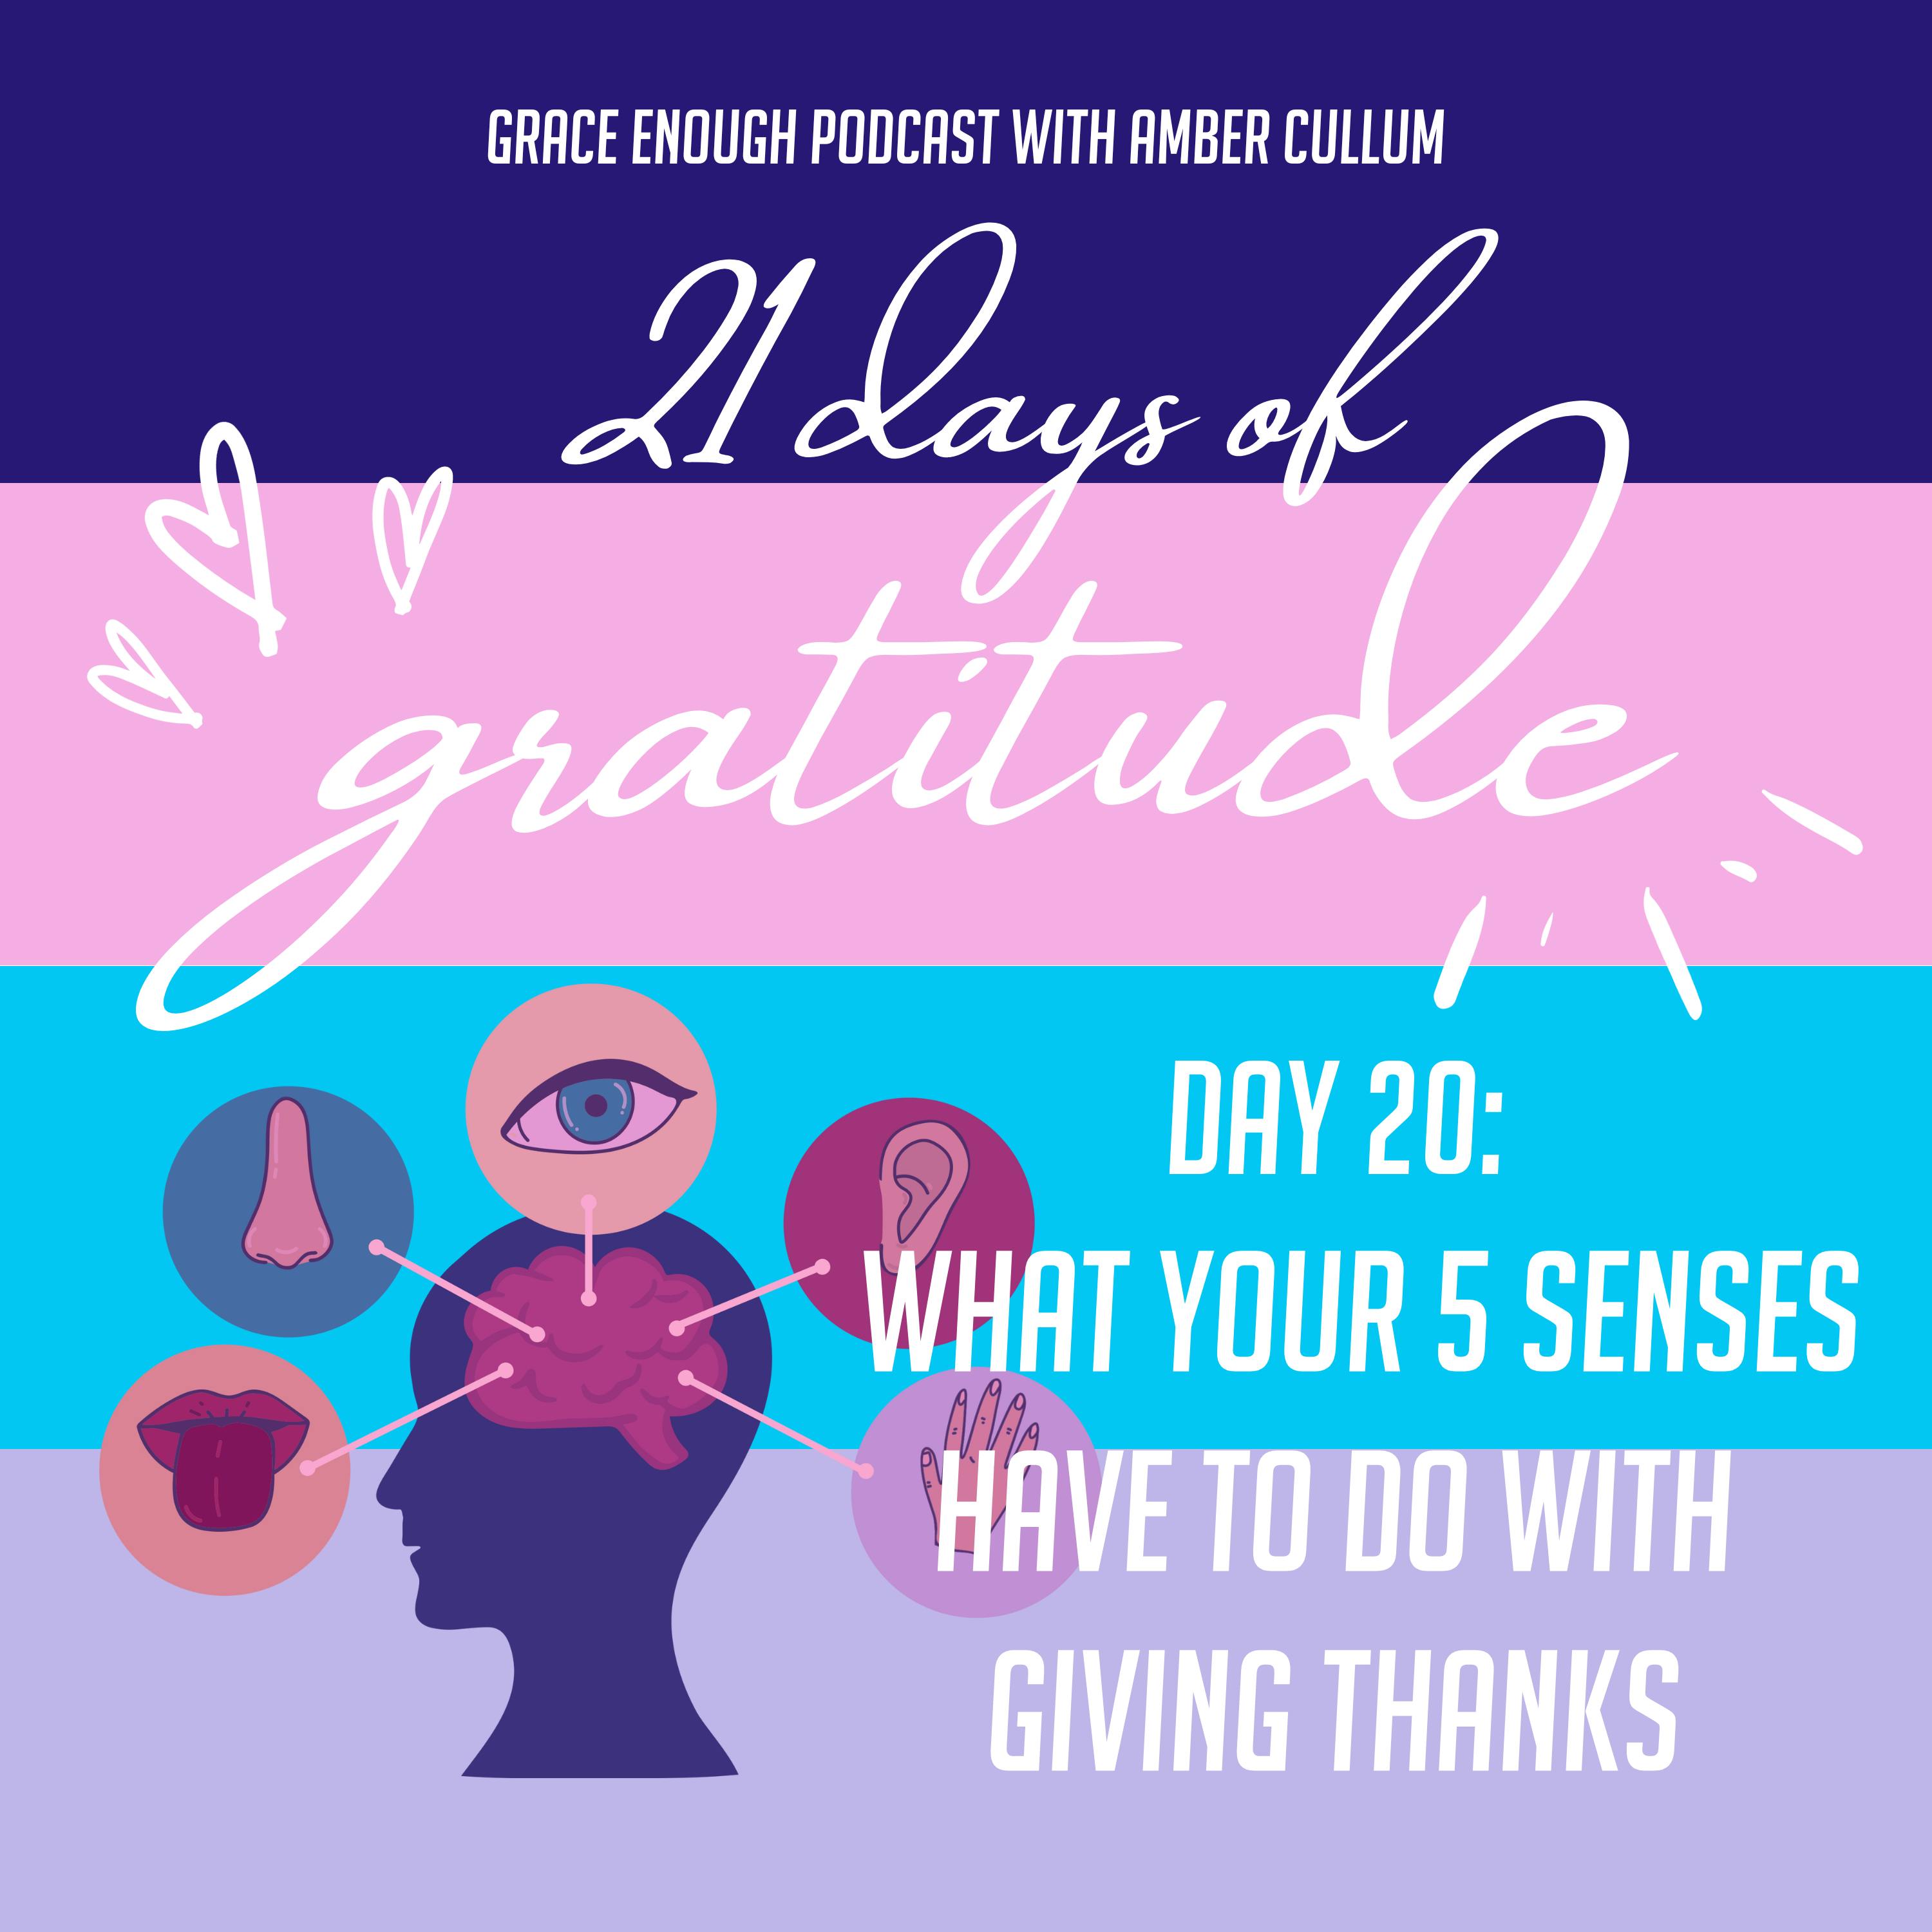 20/21 Days of Gratitude: What Your 5 Senses Have to Do with Giving Thanks